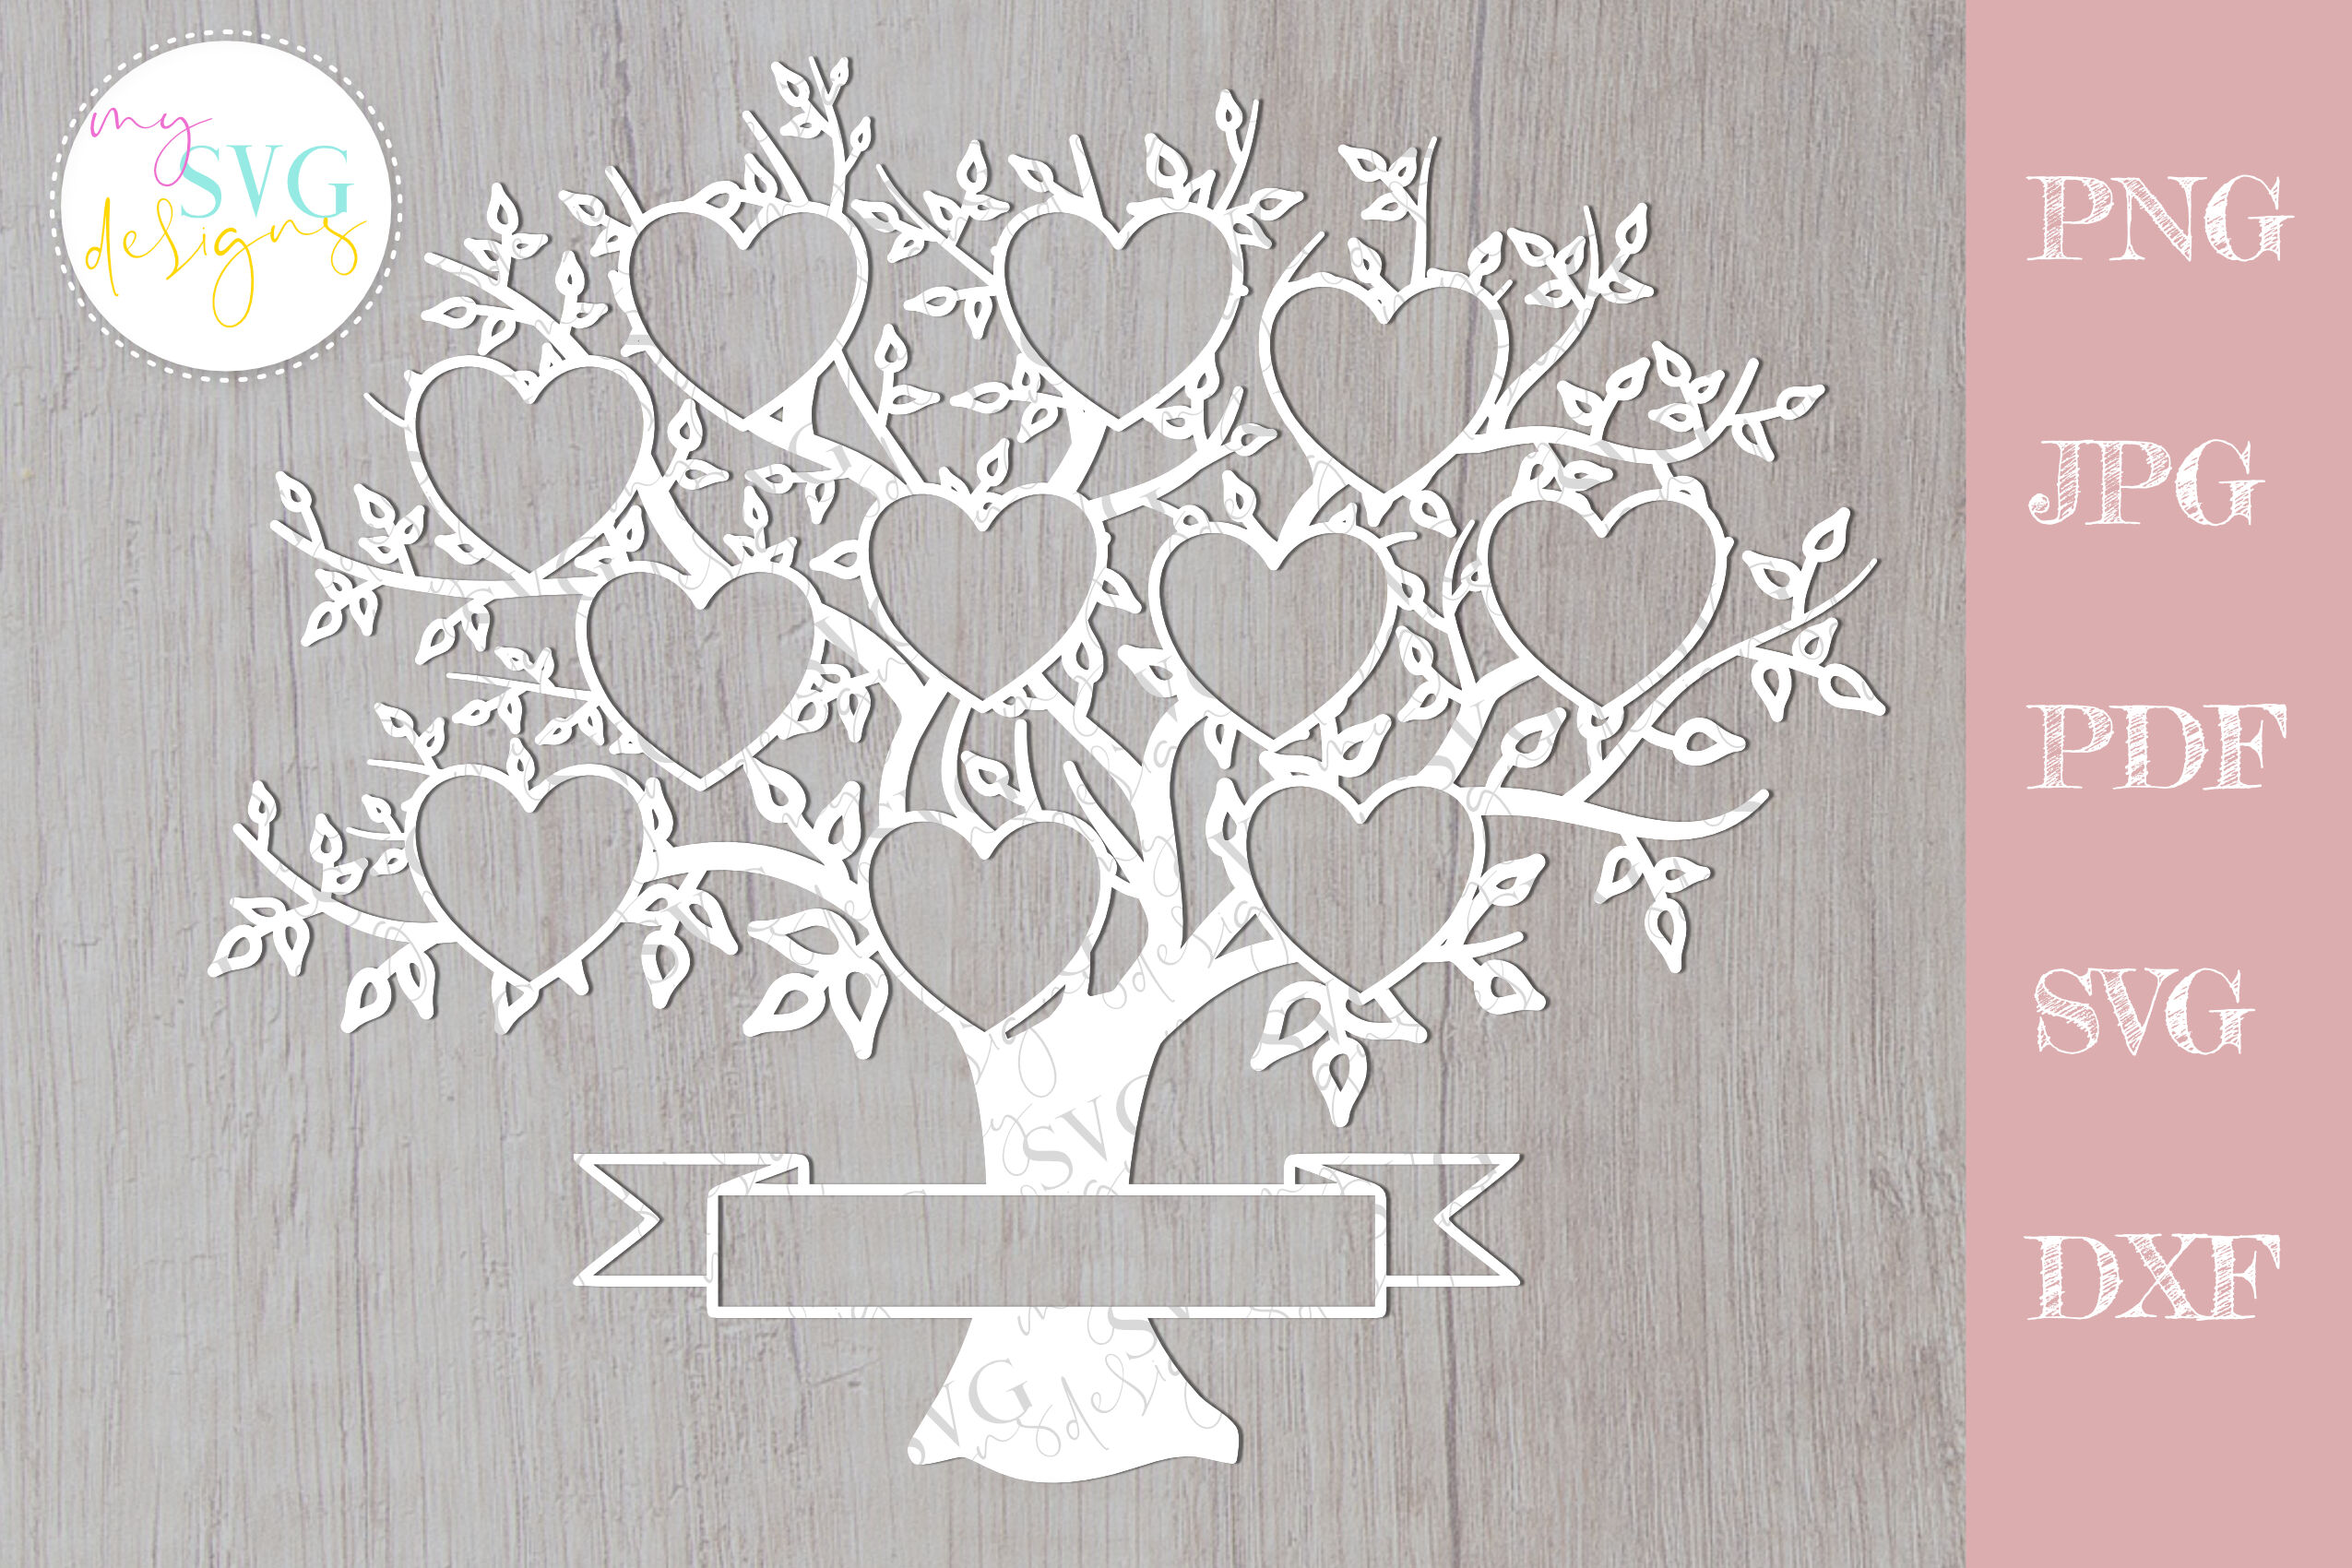 Download Family Tree Svg 11 Members Svg Family Tree Family Reunion Svg By Mysvgdesigns Thehungryjpeg Com